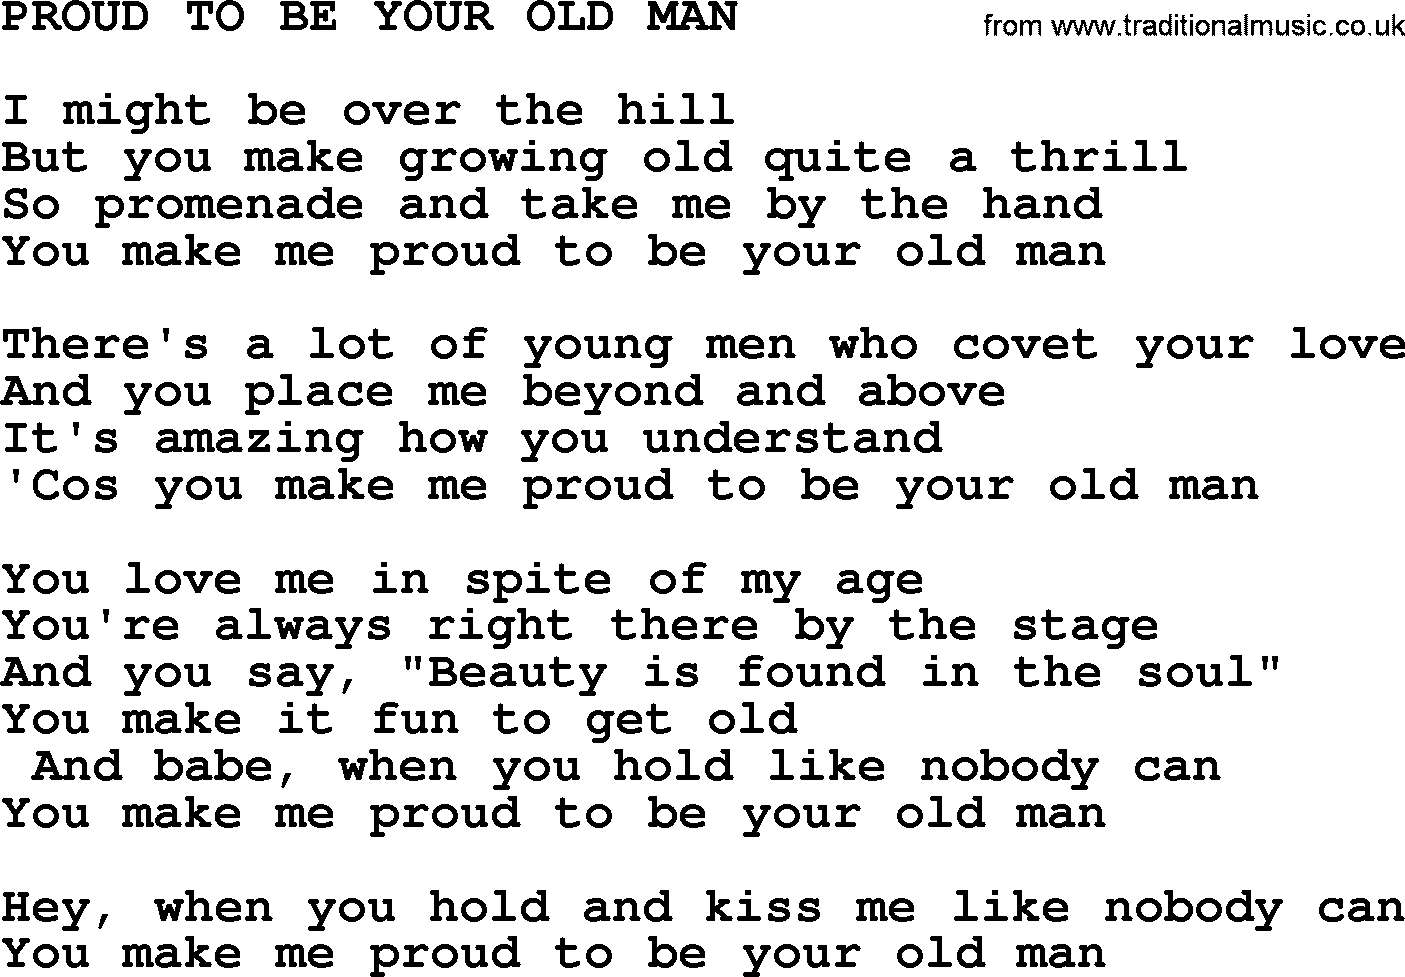 Merle Haggard song: Proud To Be Your Old Man, lyrics.